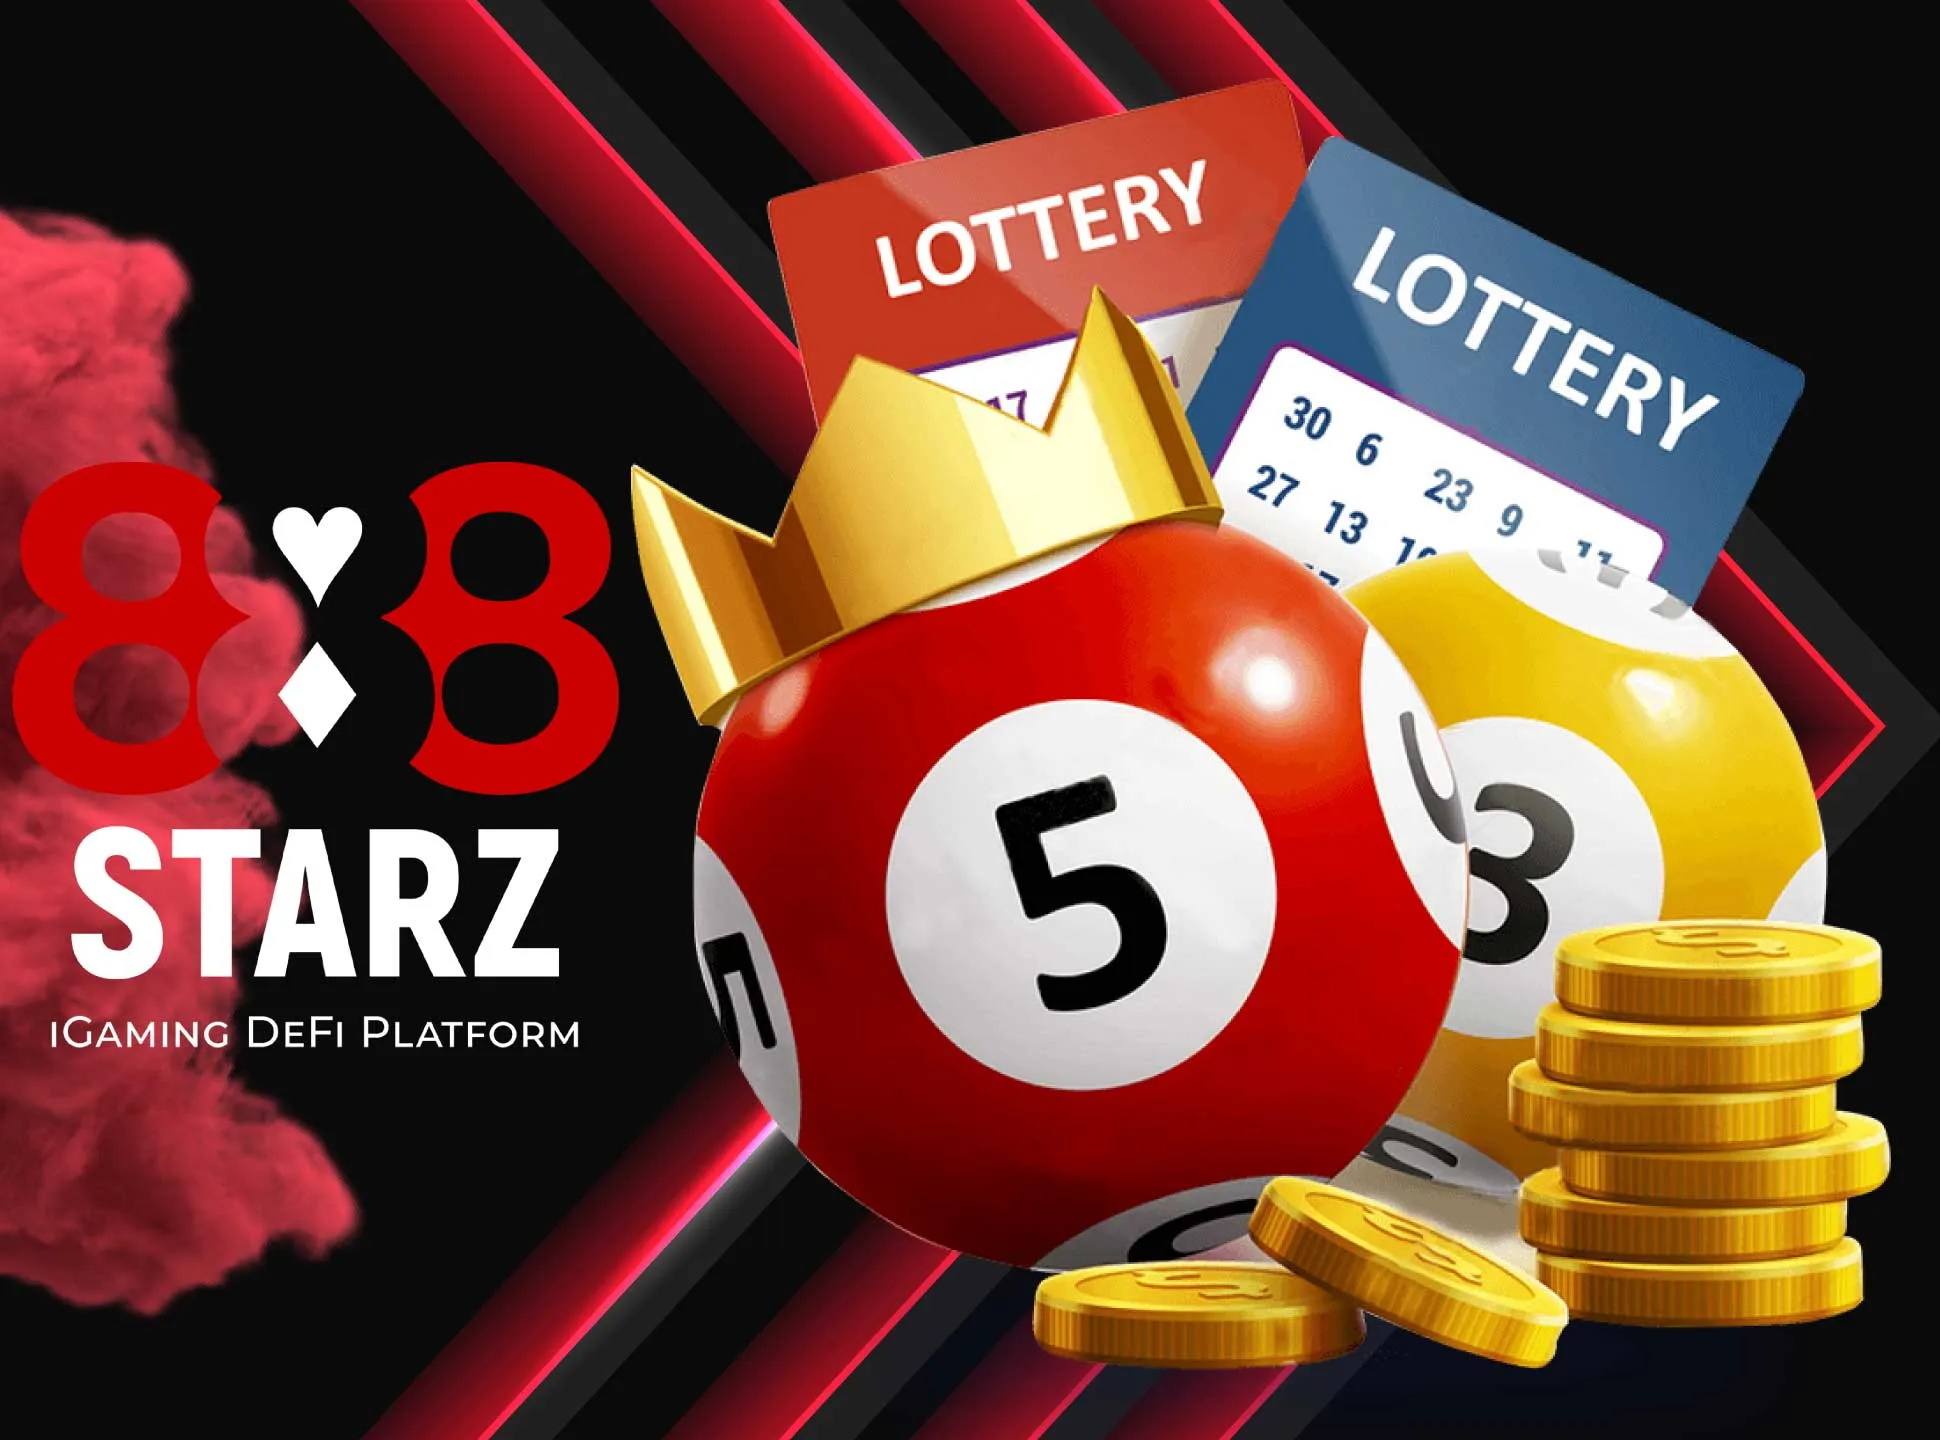 Test your luck with the 888starz lotteries.